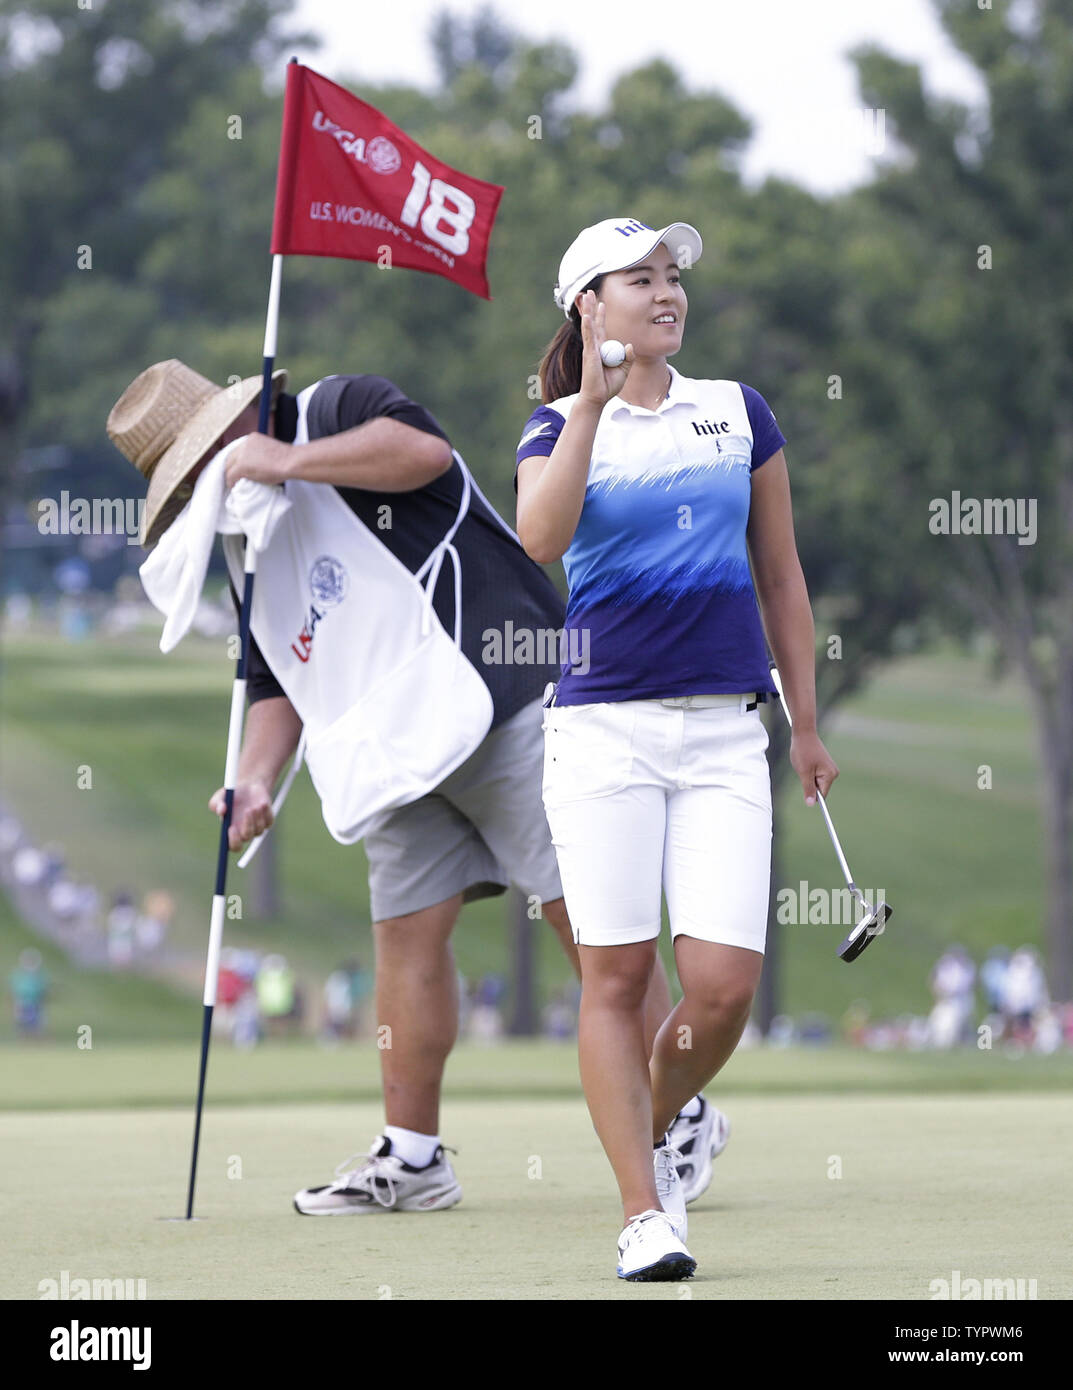 In Gee Chun of Korea walks off of the 18th green after making a bogey in the final round of the LPGA U.S. Women's Open Championship at Lancaster Country Club in Lancaster, PA on July 12, 2015. Chun wins the U.S. Women's Open and her first LPGA major championship with a score of 8 under par.     Photo by John Angelillo/UPI Stock Photo